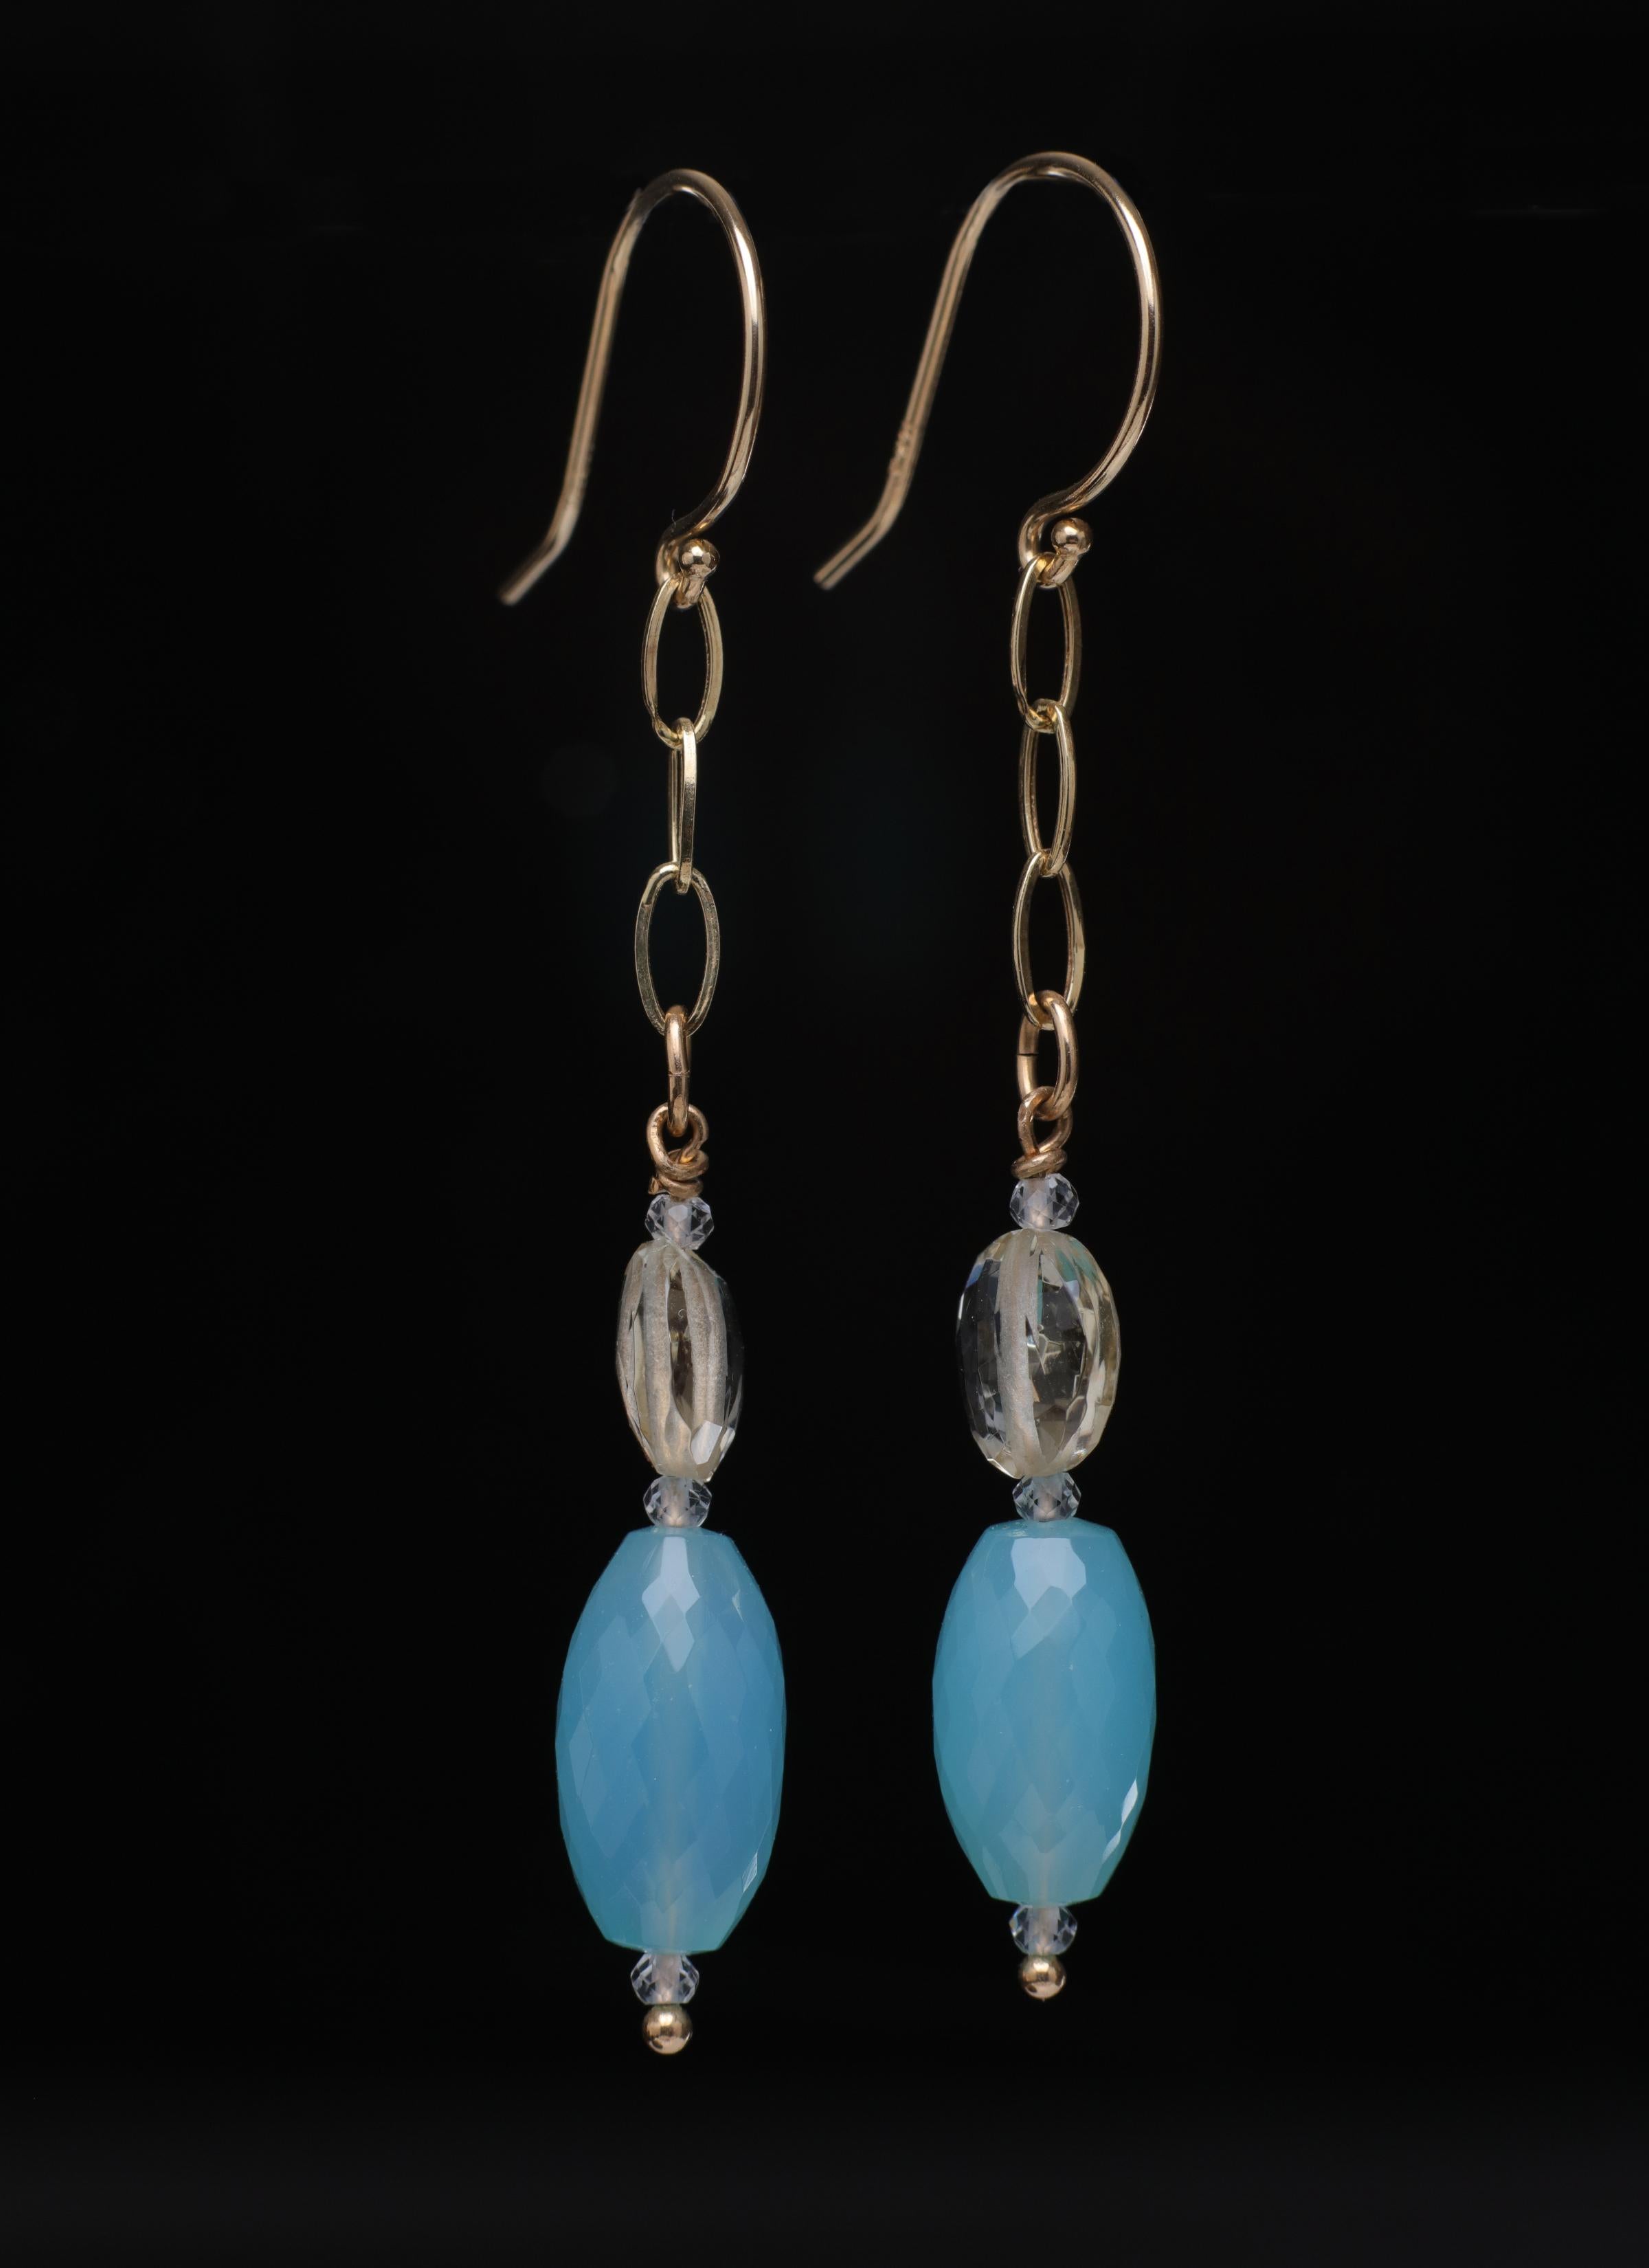 Blue chalcedony, scapolite, topaz, and gold earrings invoke a memory of my loving mother calling me to get up in the morning.  I hope some of that love warms your heart.  

